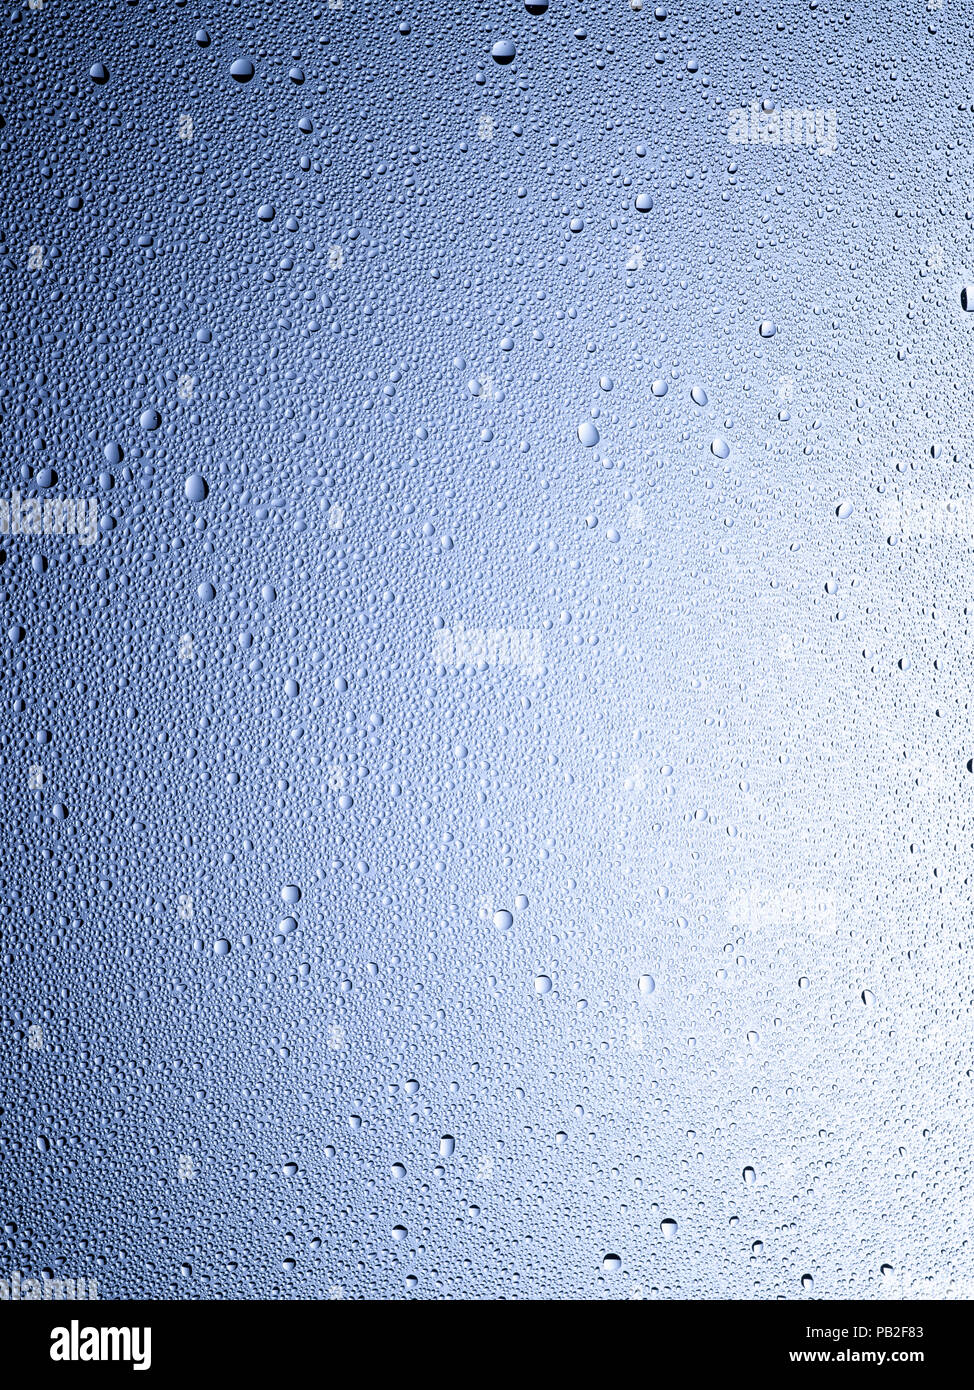 A graphic vertical framed shot of some dew, droplets or condensation. Stock Photo